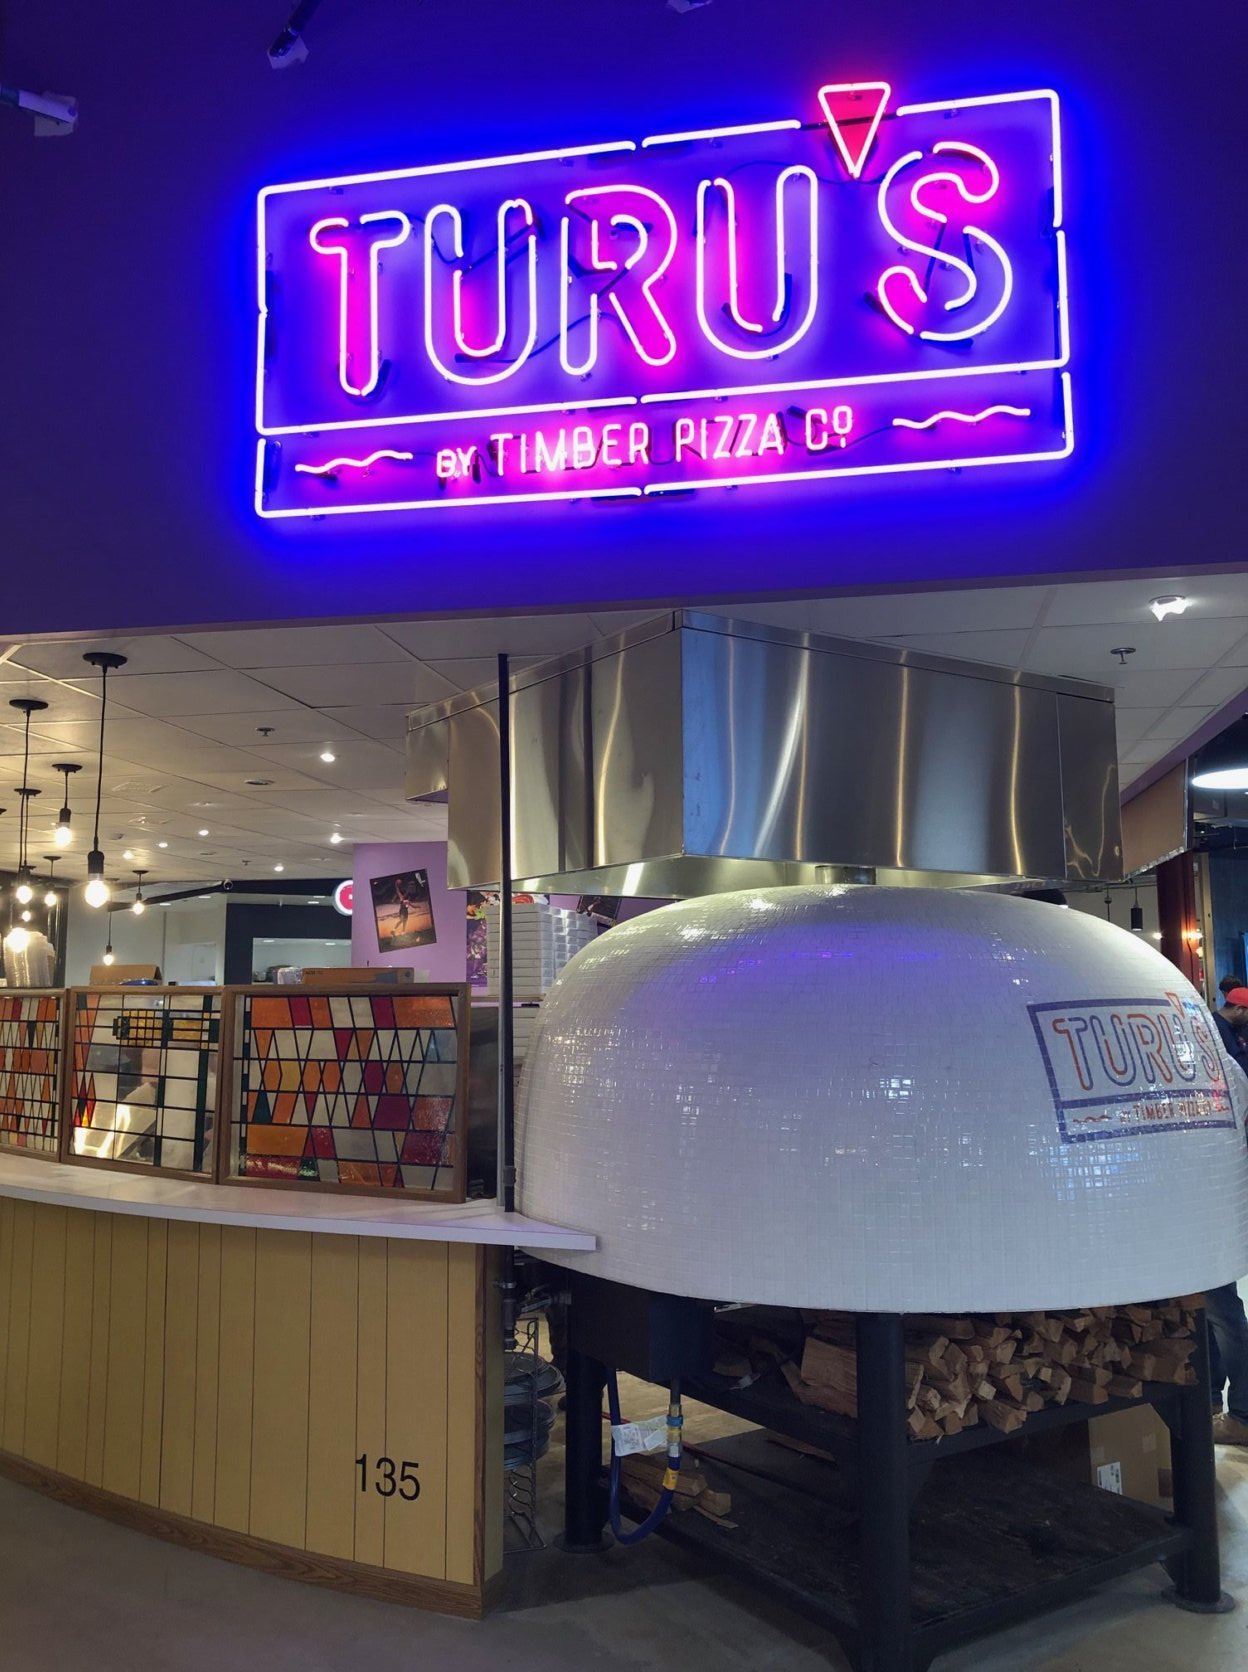 The team behind Timber Pizza Co. is firing up New York-style slices in the wood oven of its new outpost, Turu’s. (WTOP/Rachel Nania) 

